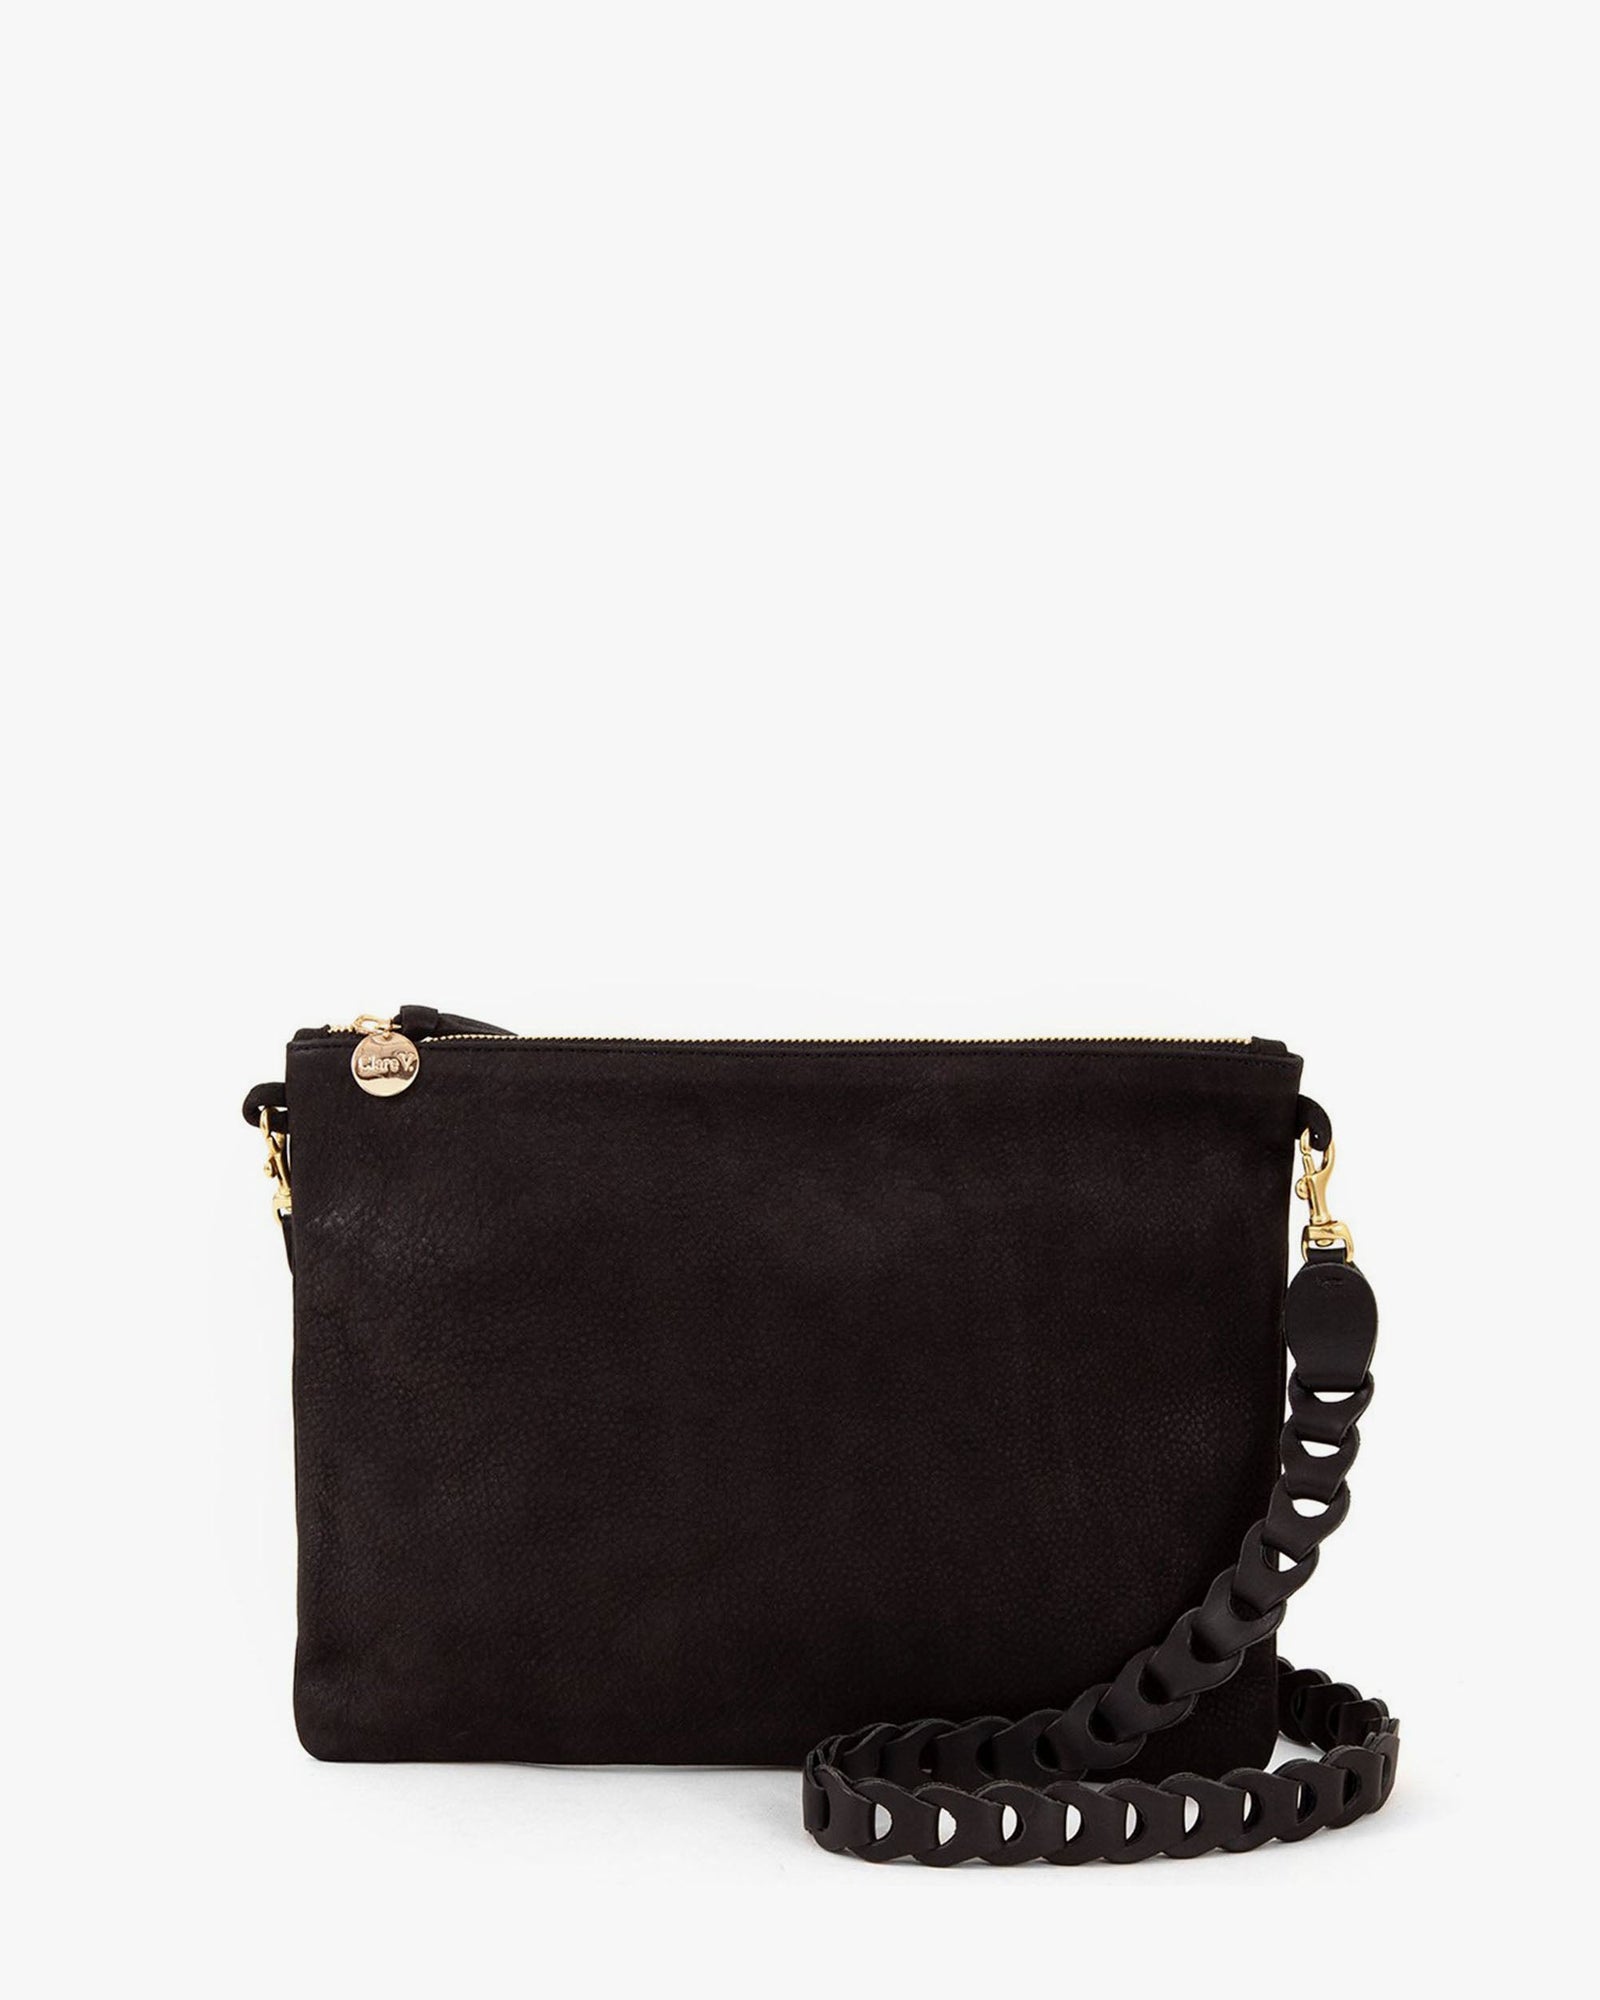 Sac Bretelle in Black with Crossbody Leather Link Strap